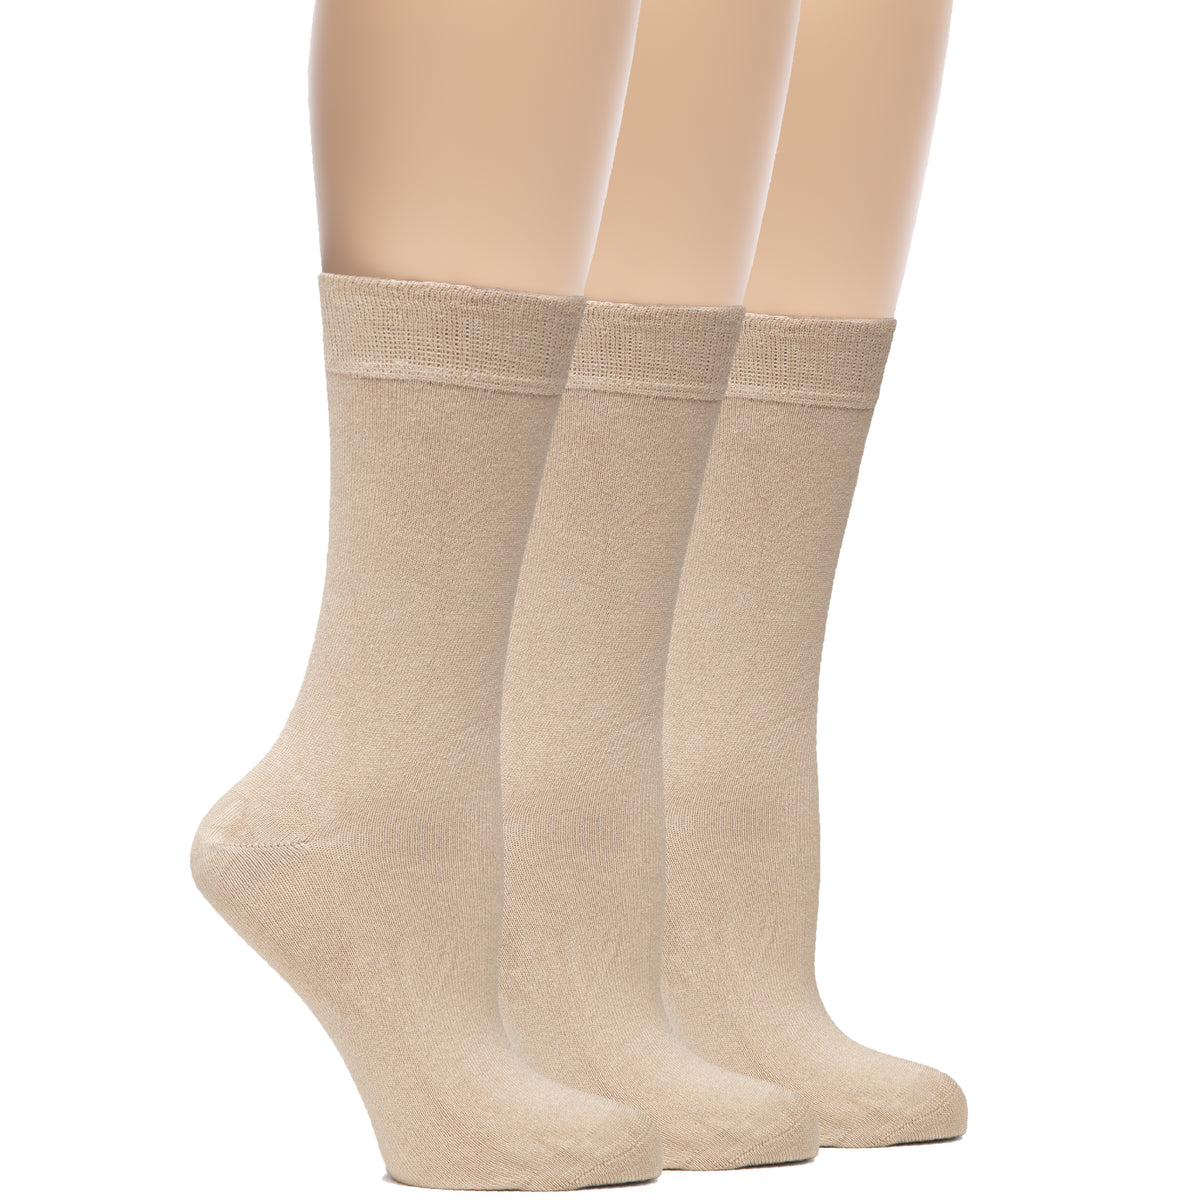 A trio of women's beige bamboo crew socks, perfect for everyday wear and comfort.